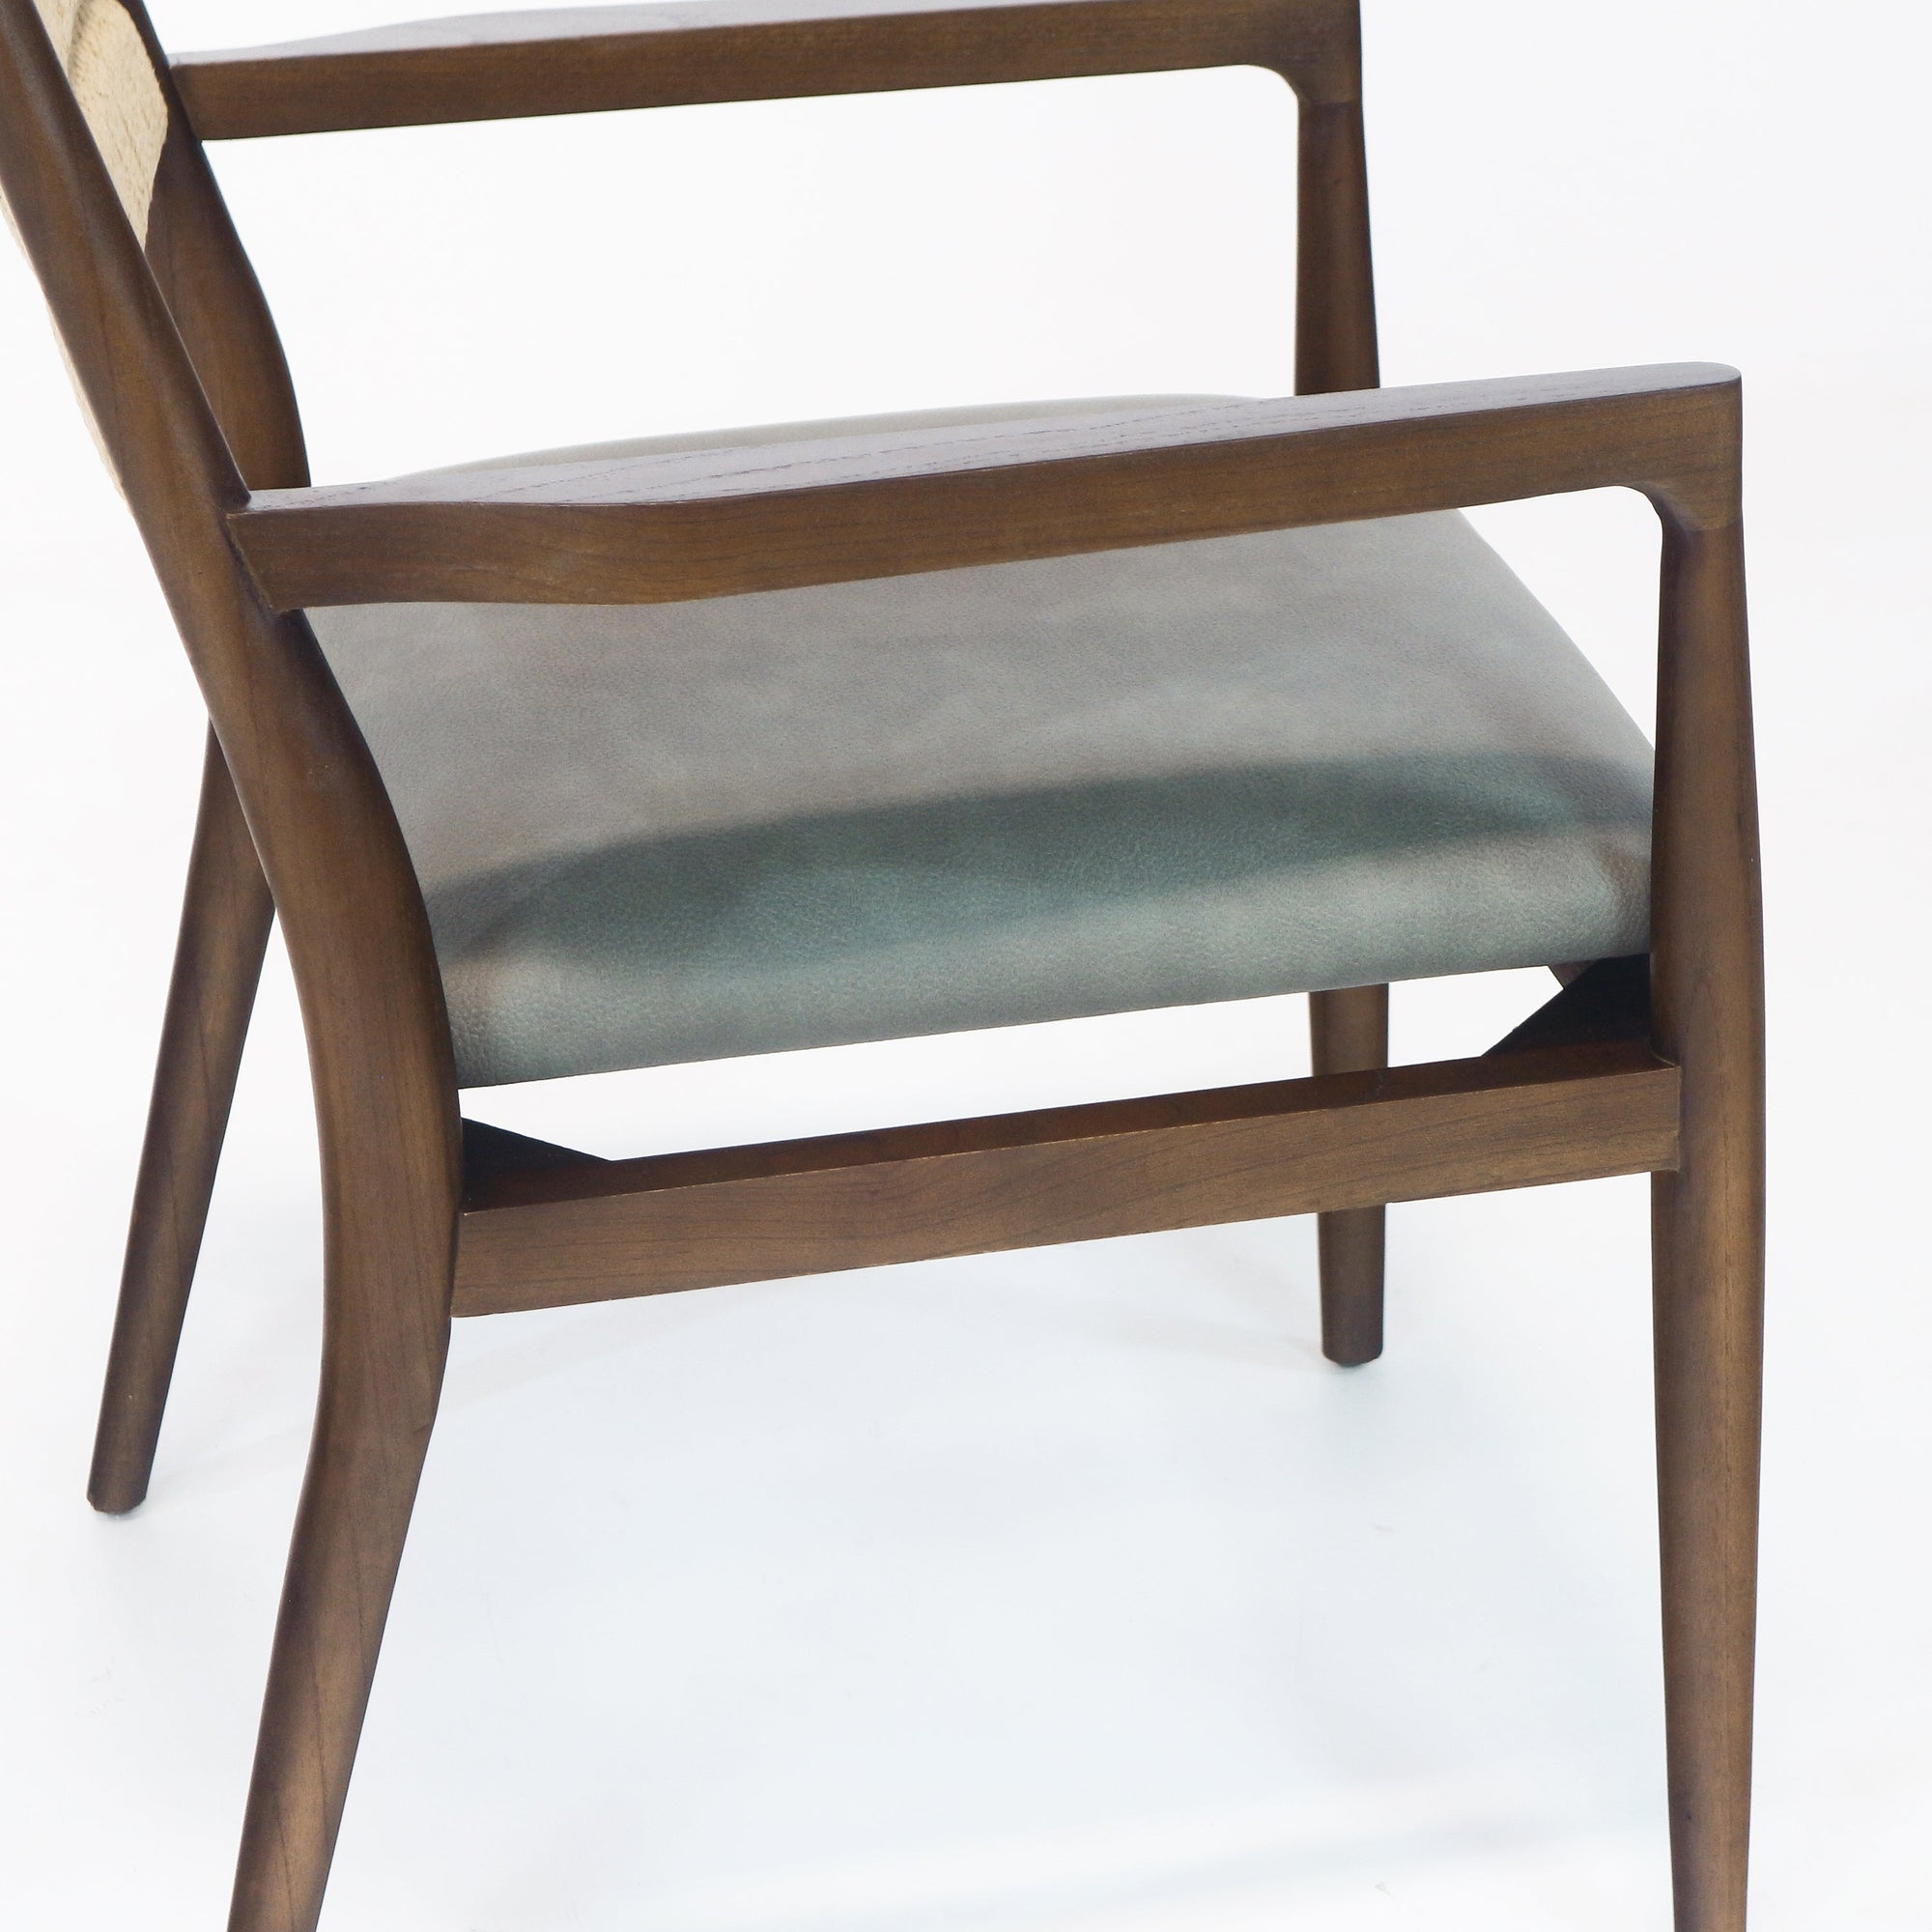 Samsara Dining Chair with Rope Backrest with Blue Leather Seat - INTERIORTONIC